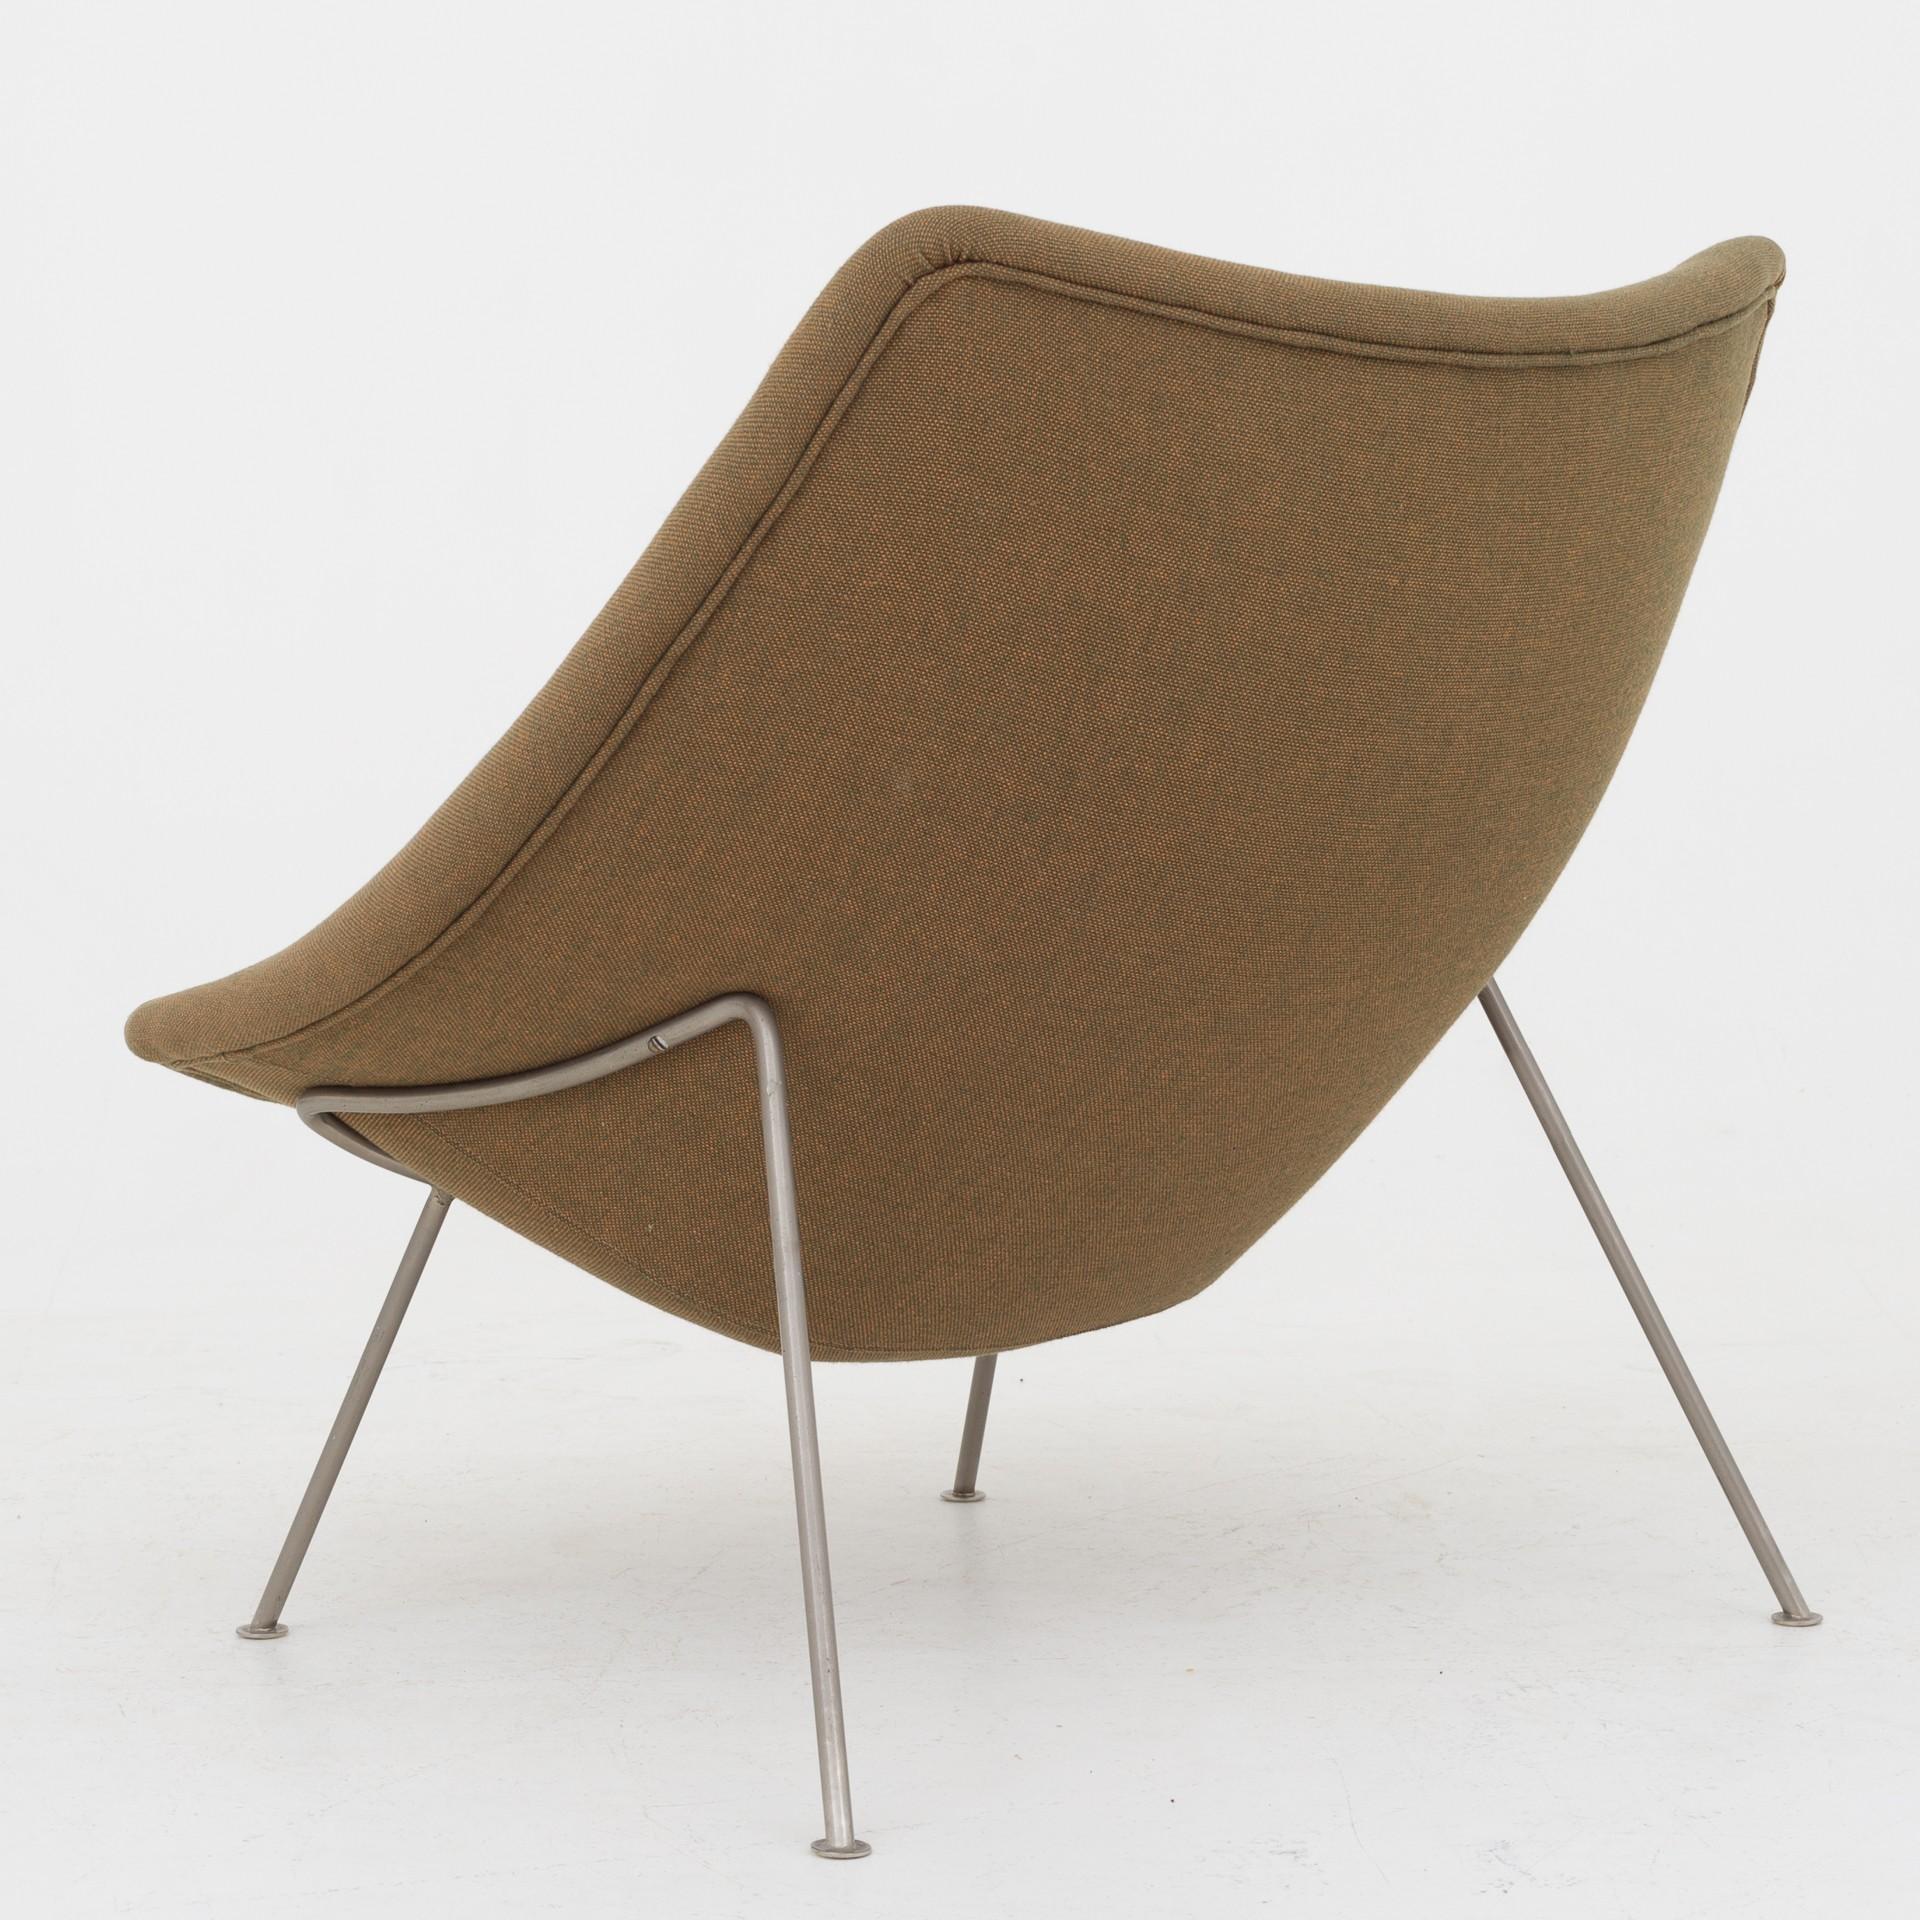 'Oyster' lounge chair in wool and legs of steel. Maker Artifort.